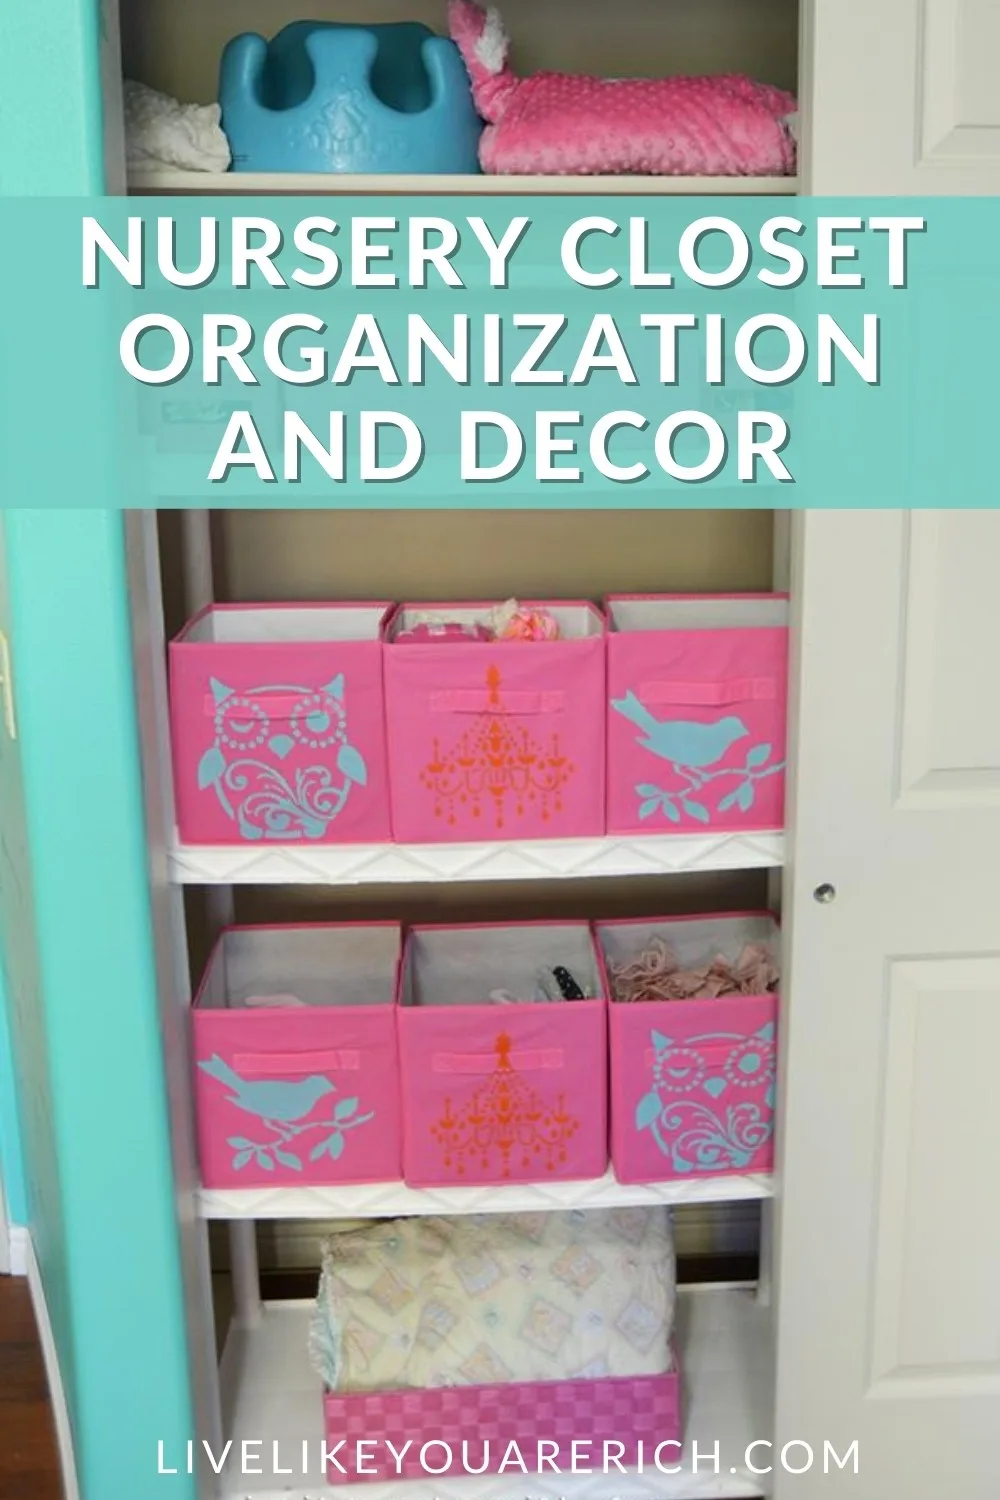 This Nursery Closet Organization and Decor is an inexpensive, yet very quick organization project. I am very happy with the way it turned out and with the Tulip for Your Home stencils and paint it turned out much cuter than I could’ve imagined. It works great for busy and efficient parents.